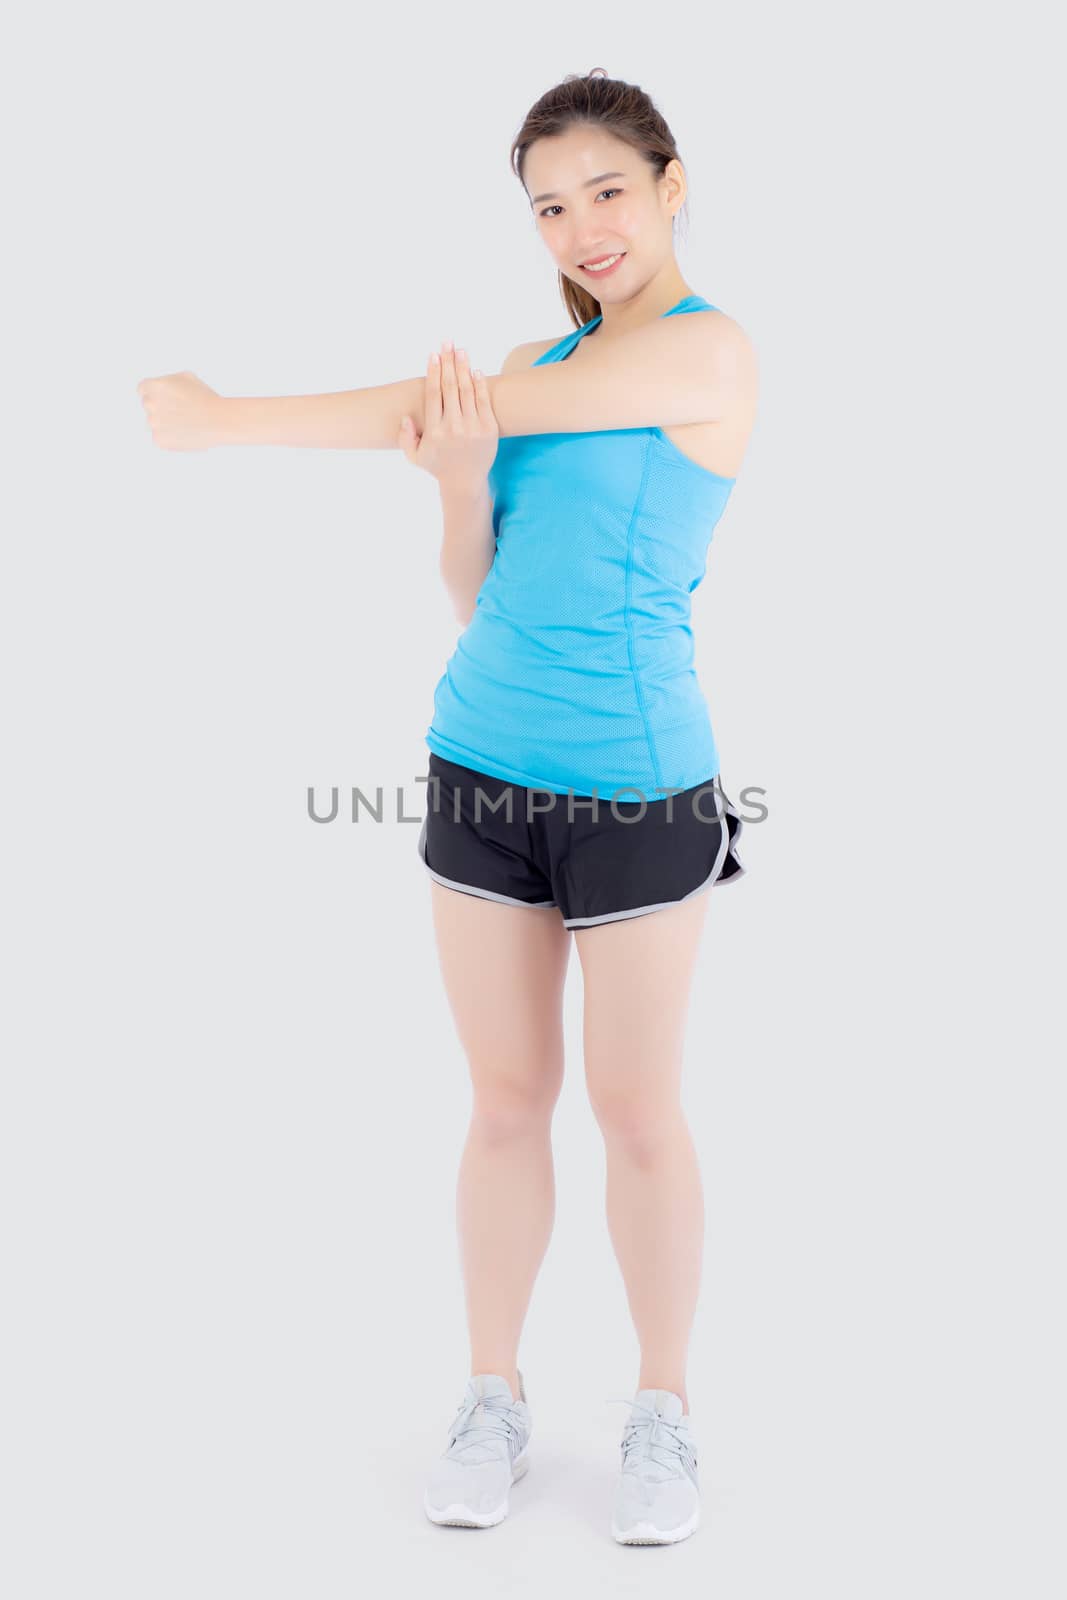 Beautiful portrait young asian woman happy standing stretch muscle arm isolated on white background, girl wear sport clothes smiling exercise yoga for health, healthy and wellness concept.